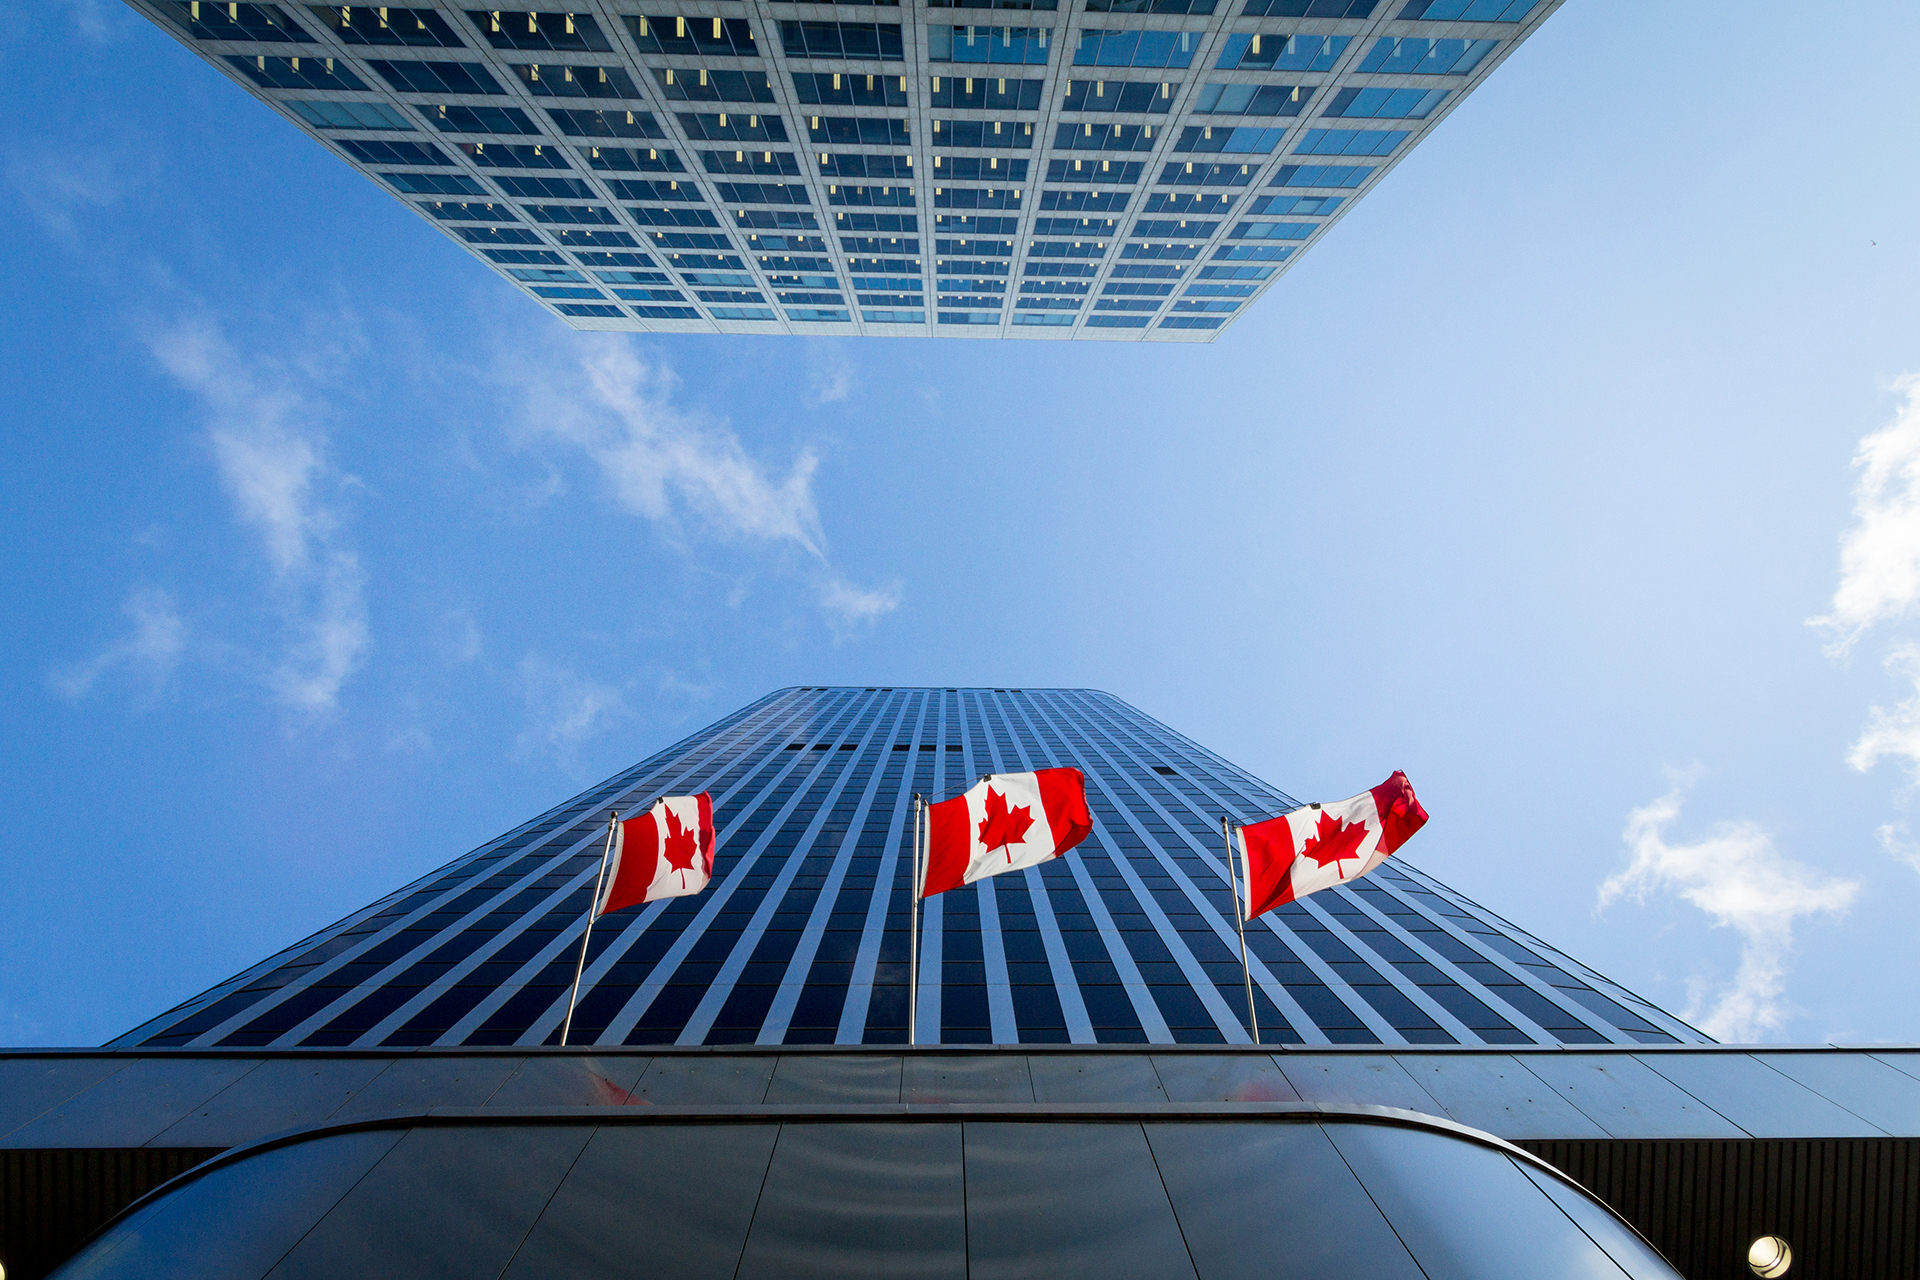 Three Canadian flags in front of a business building